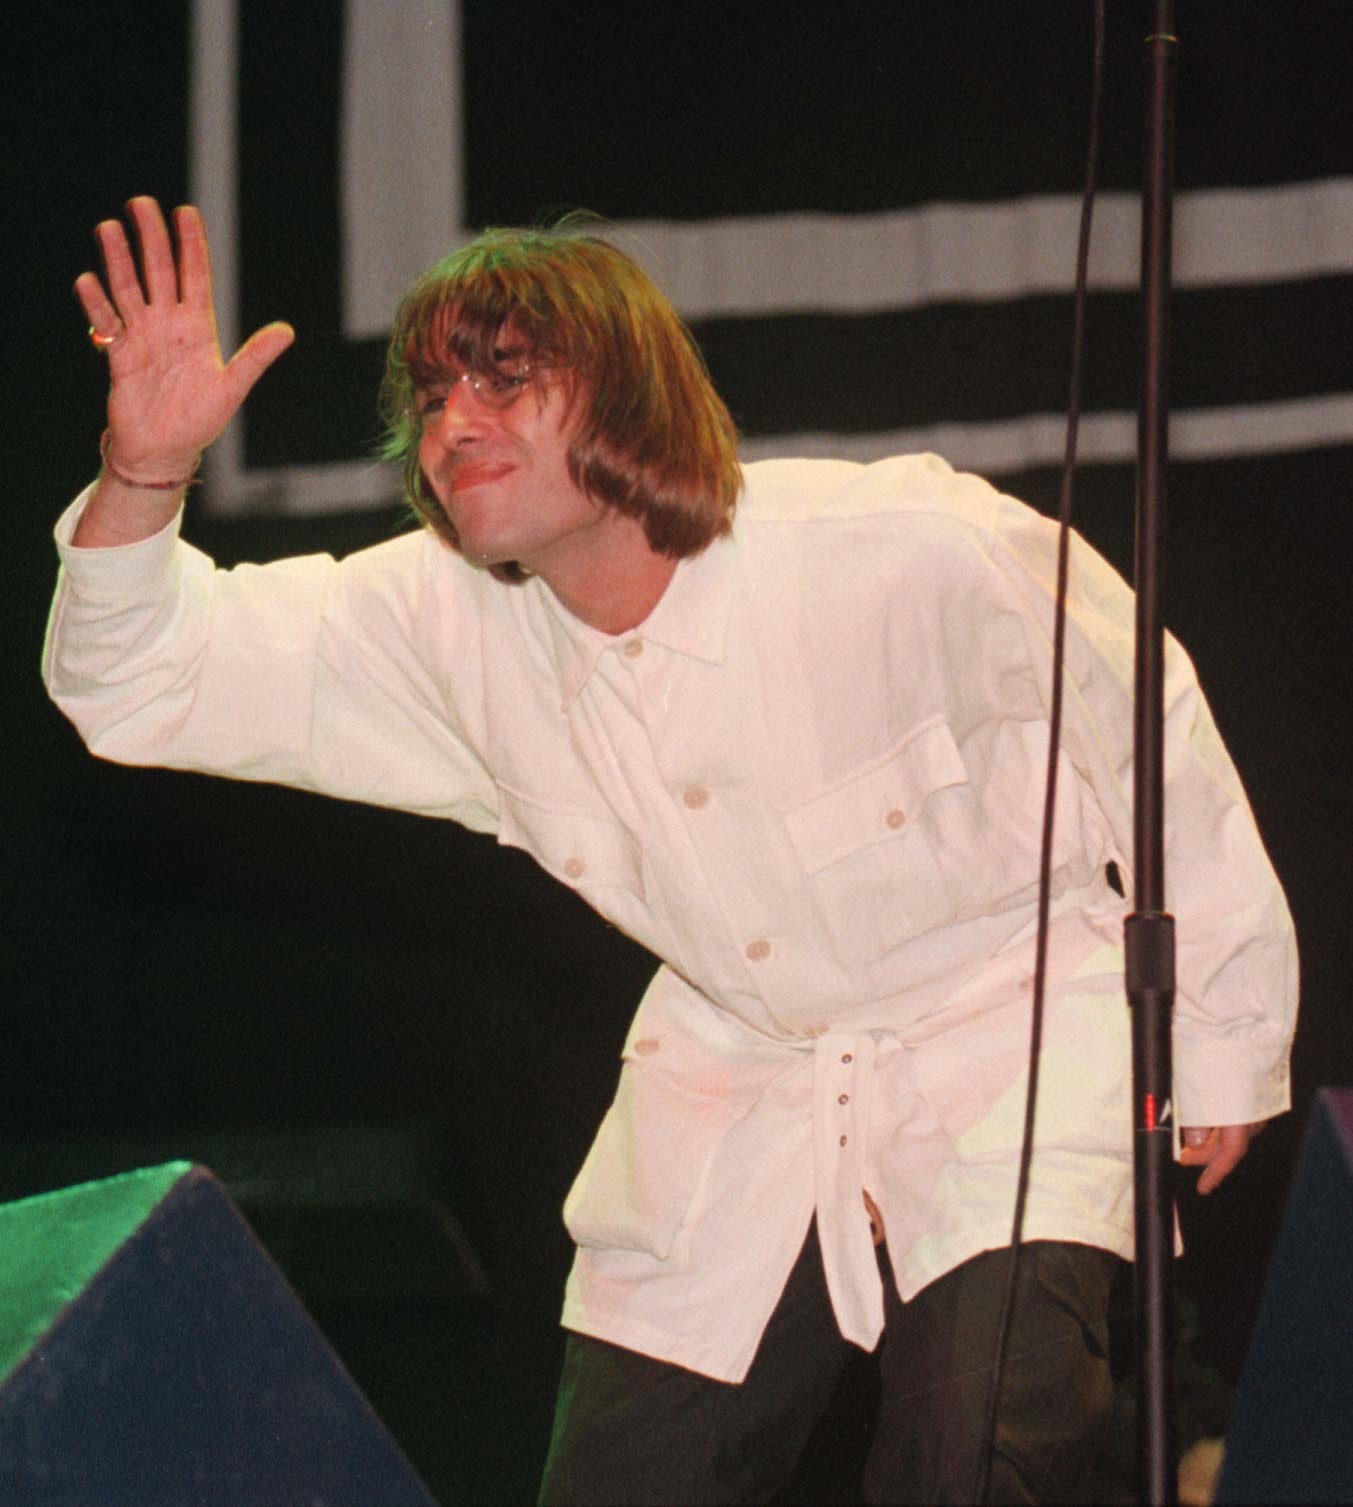 Two decades after release, Oasis classic back in top 40 following